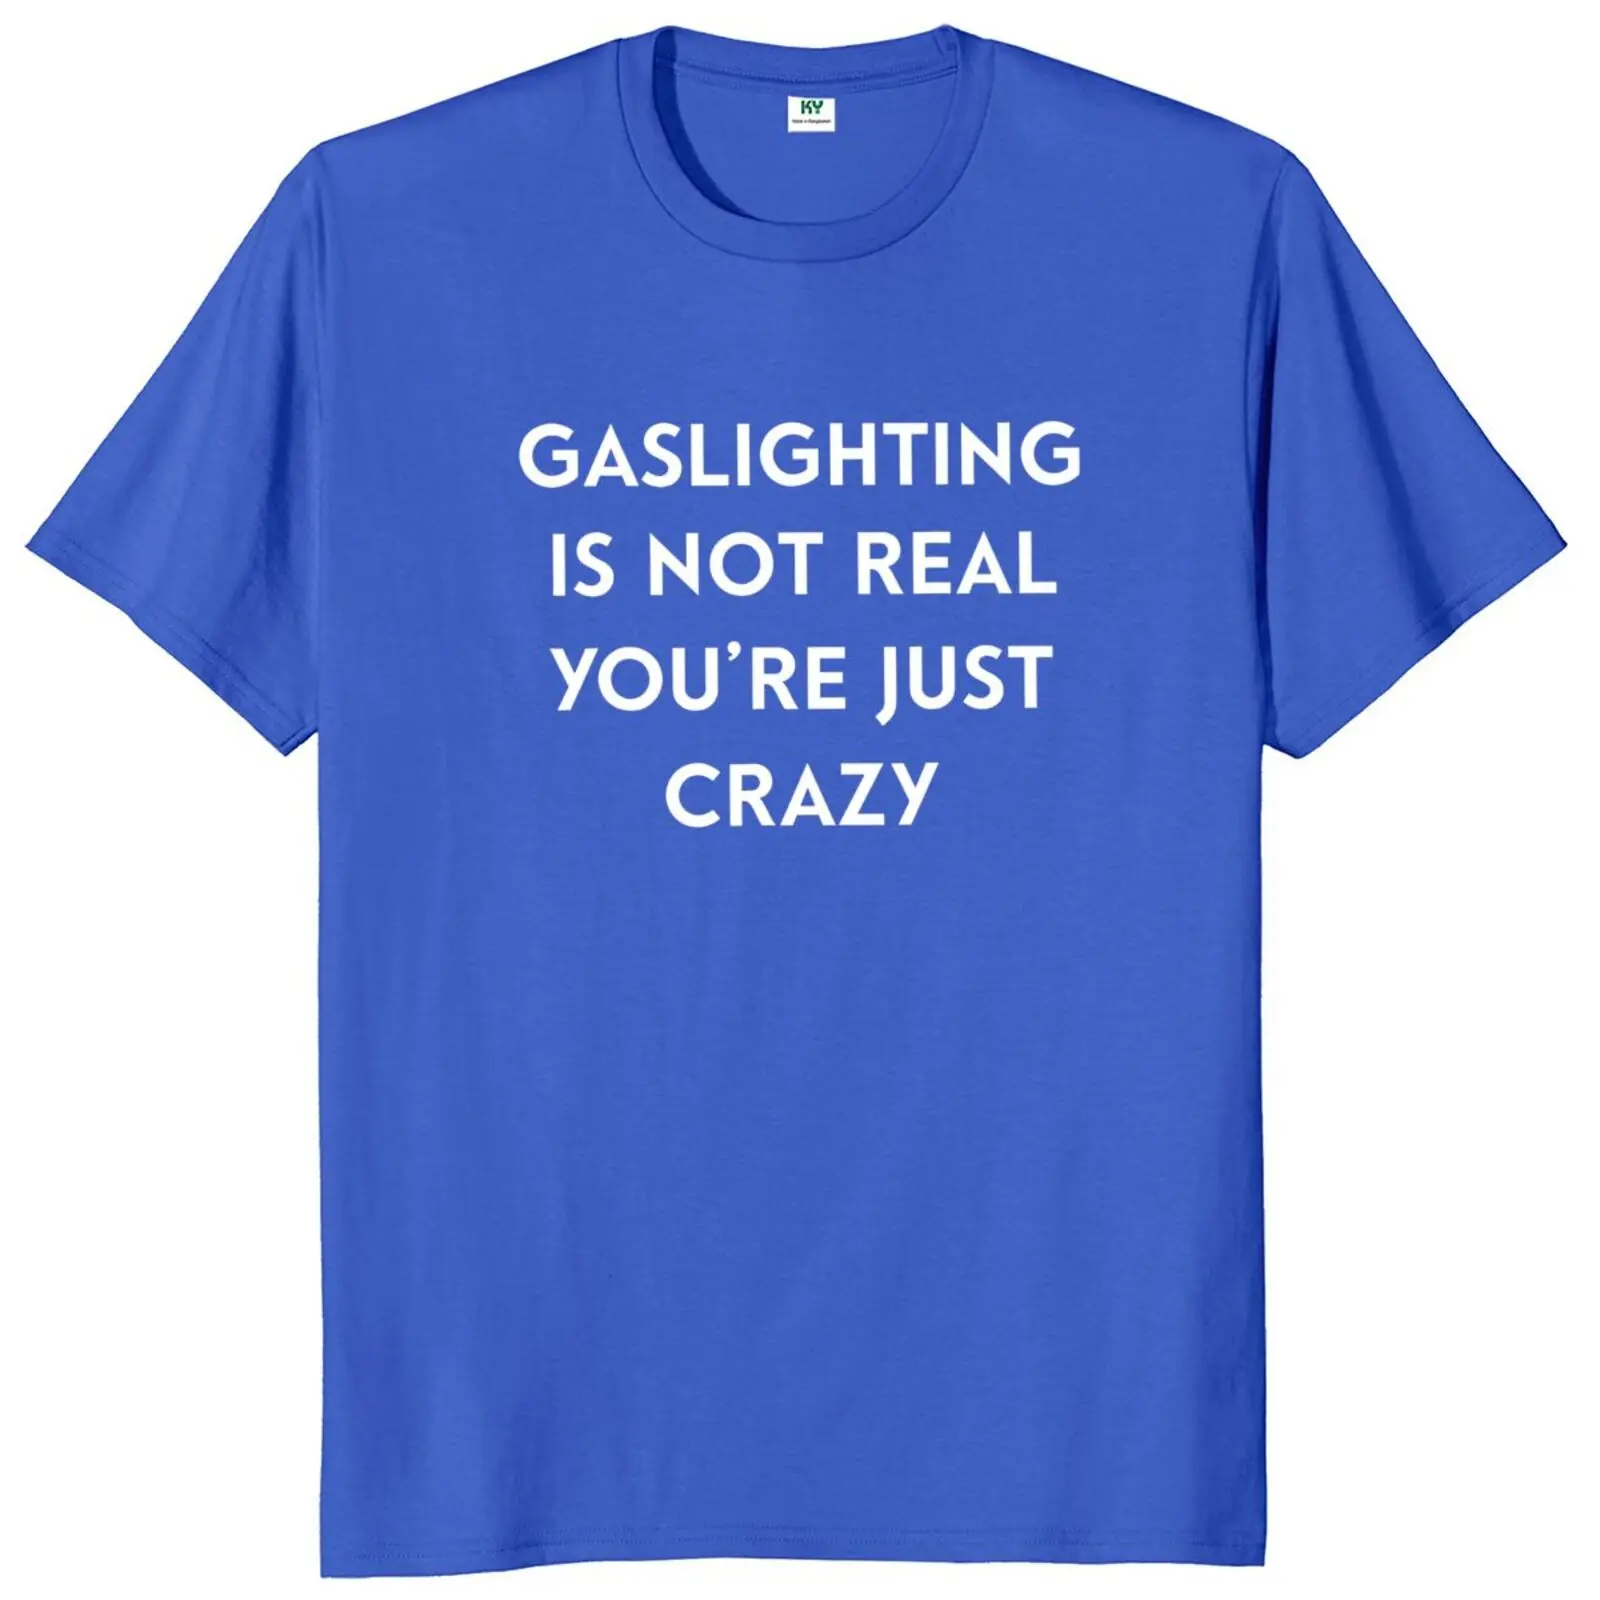 Gaslighting Is Not Real You're Just Crazy T-Shirt 2022 New Funny Memes Humor Jokes T Shirt Premium Summer Cotton Tee Tops